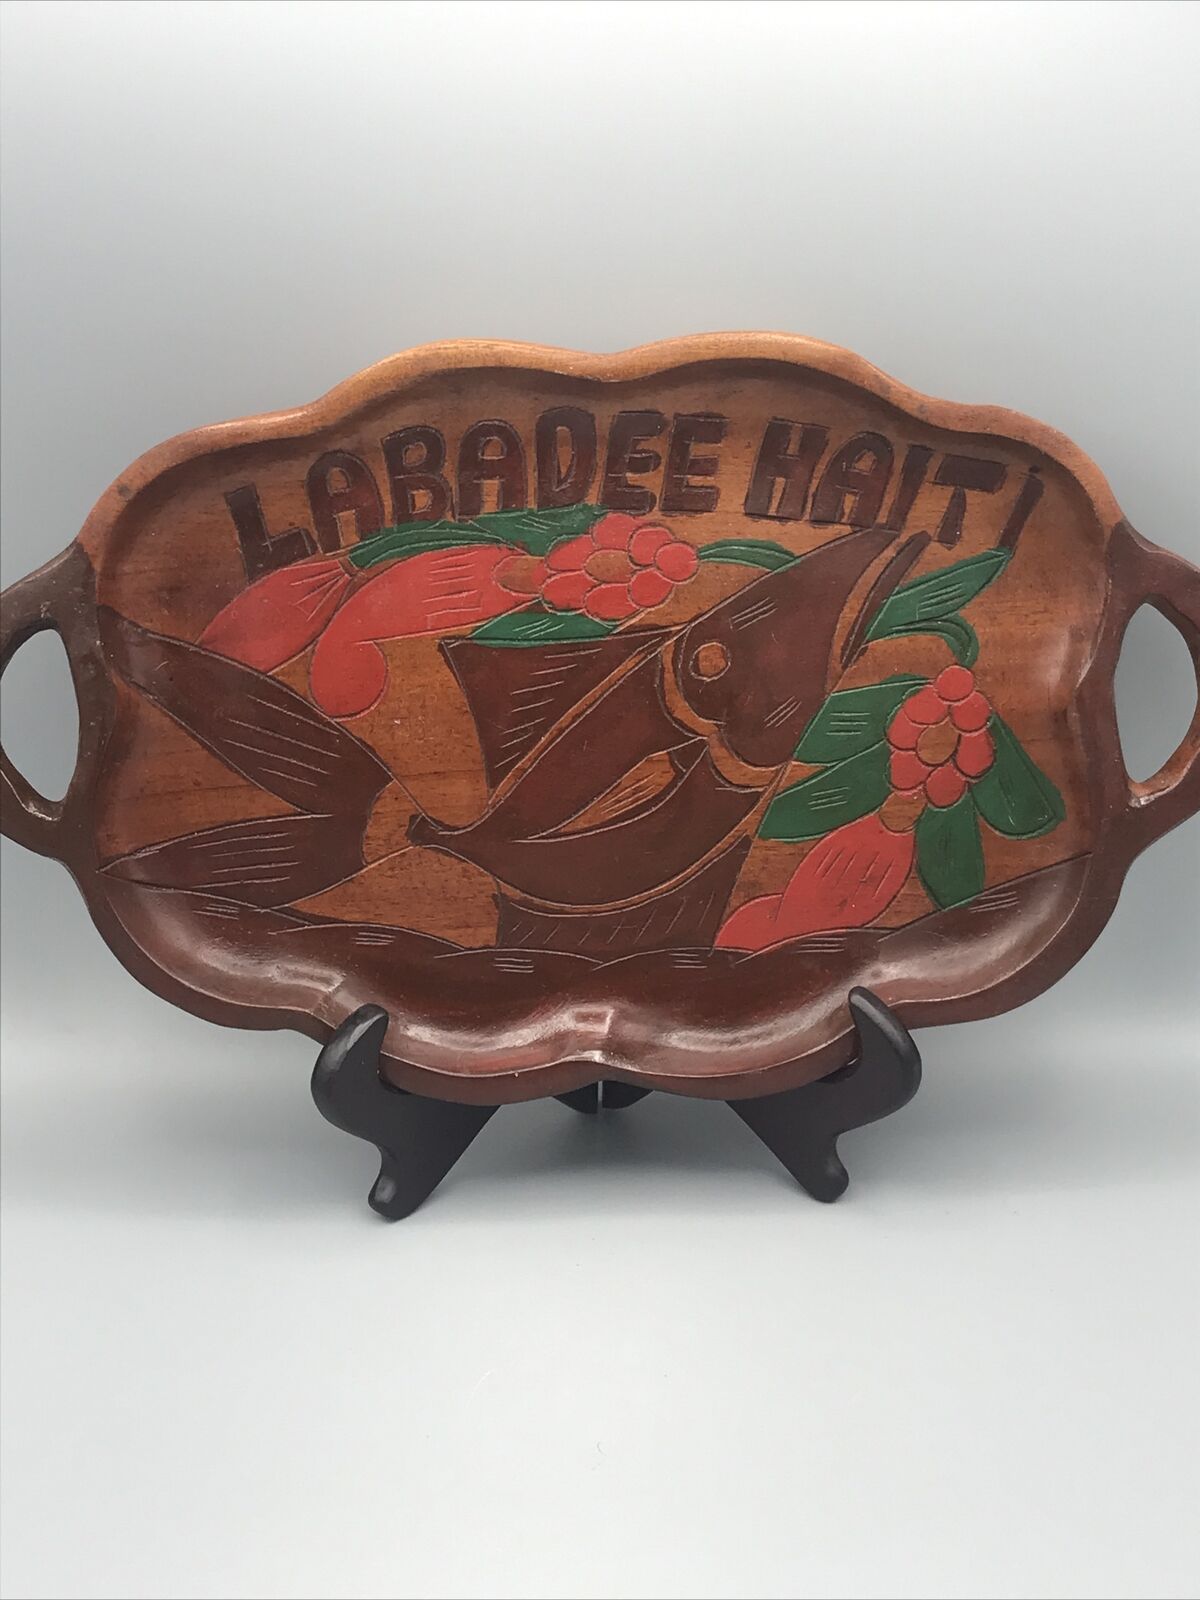 Vtg Labadee Haiti Wood Art Tray Carved Fish And Red And Green Floral  15”.